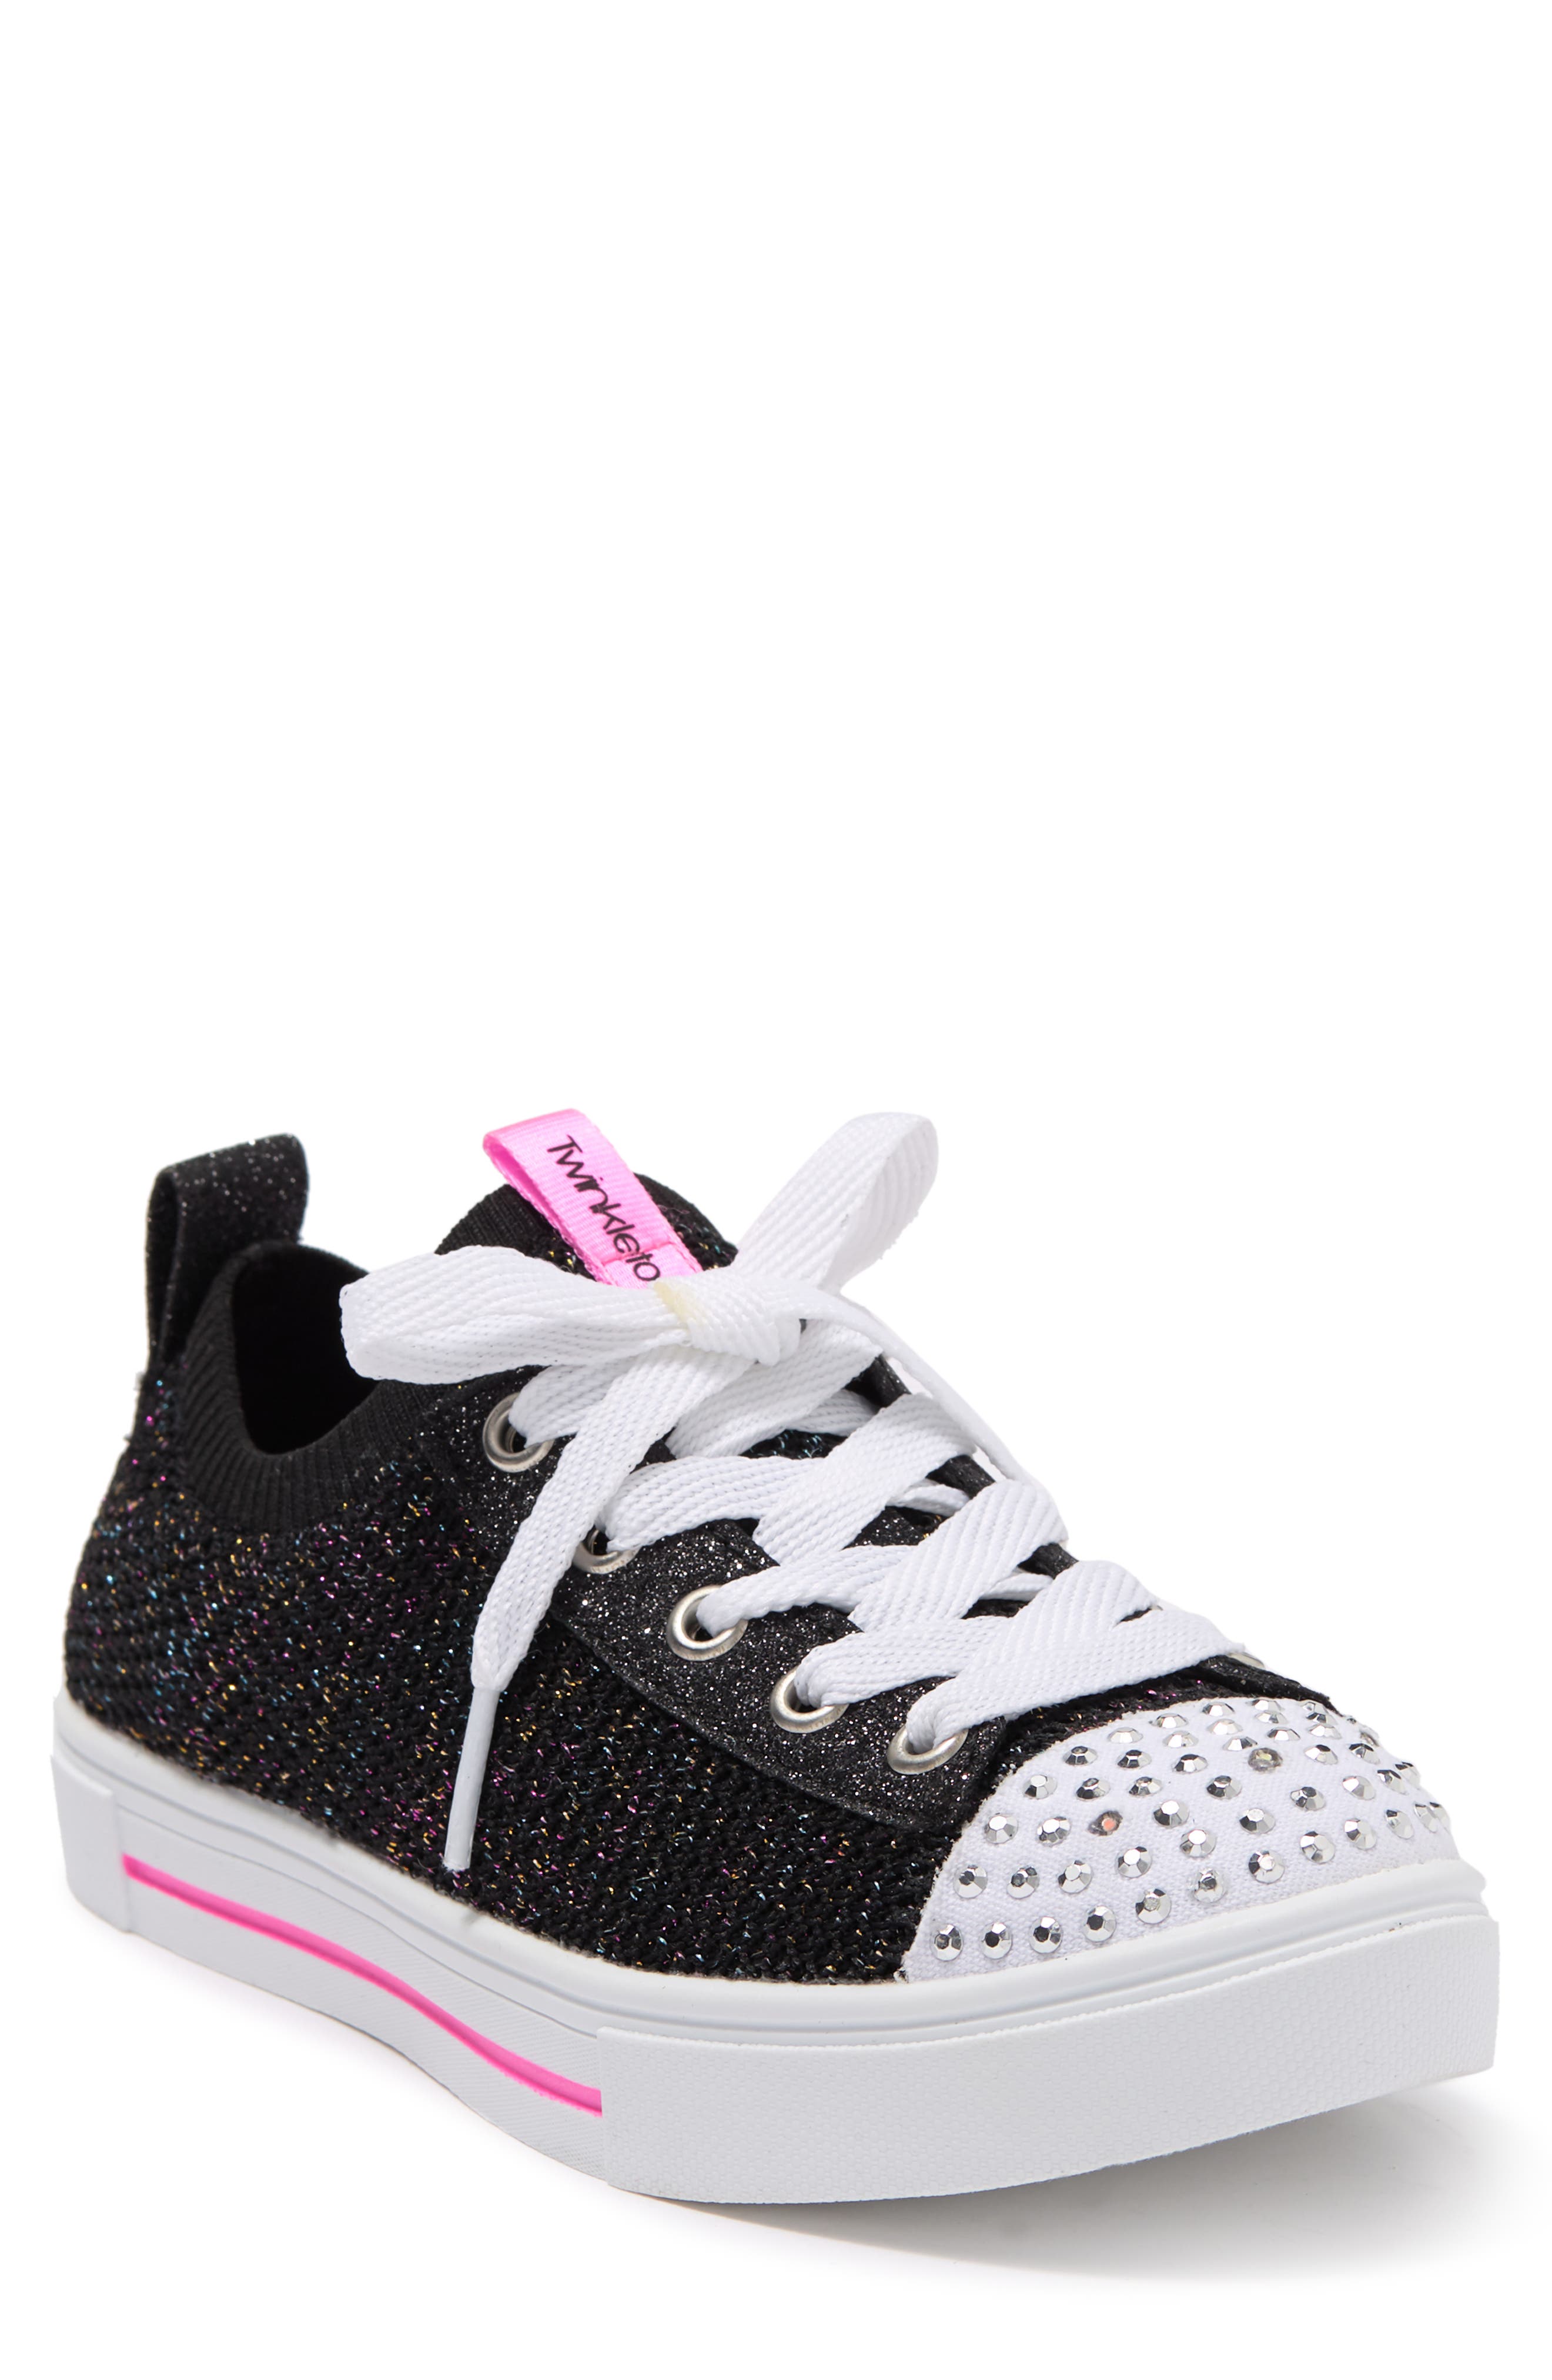 cheap skechers twinkle toes light up